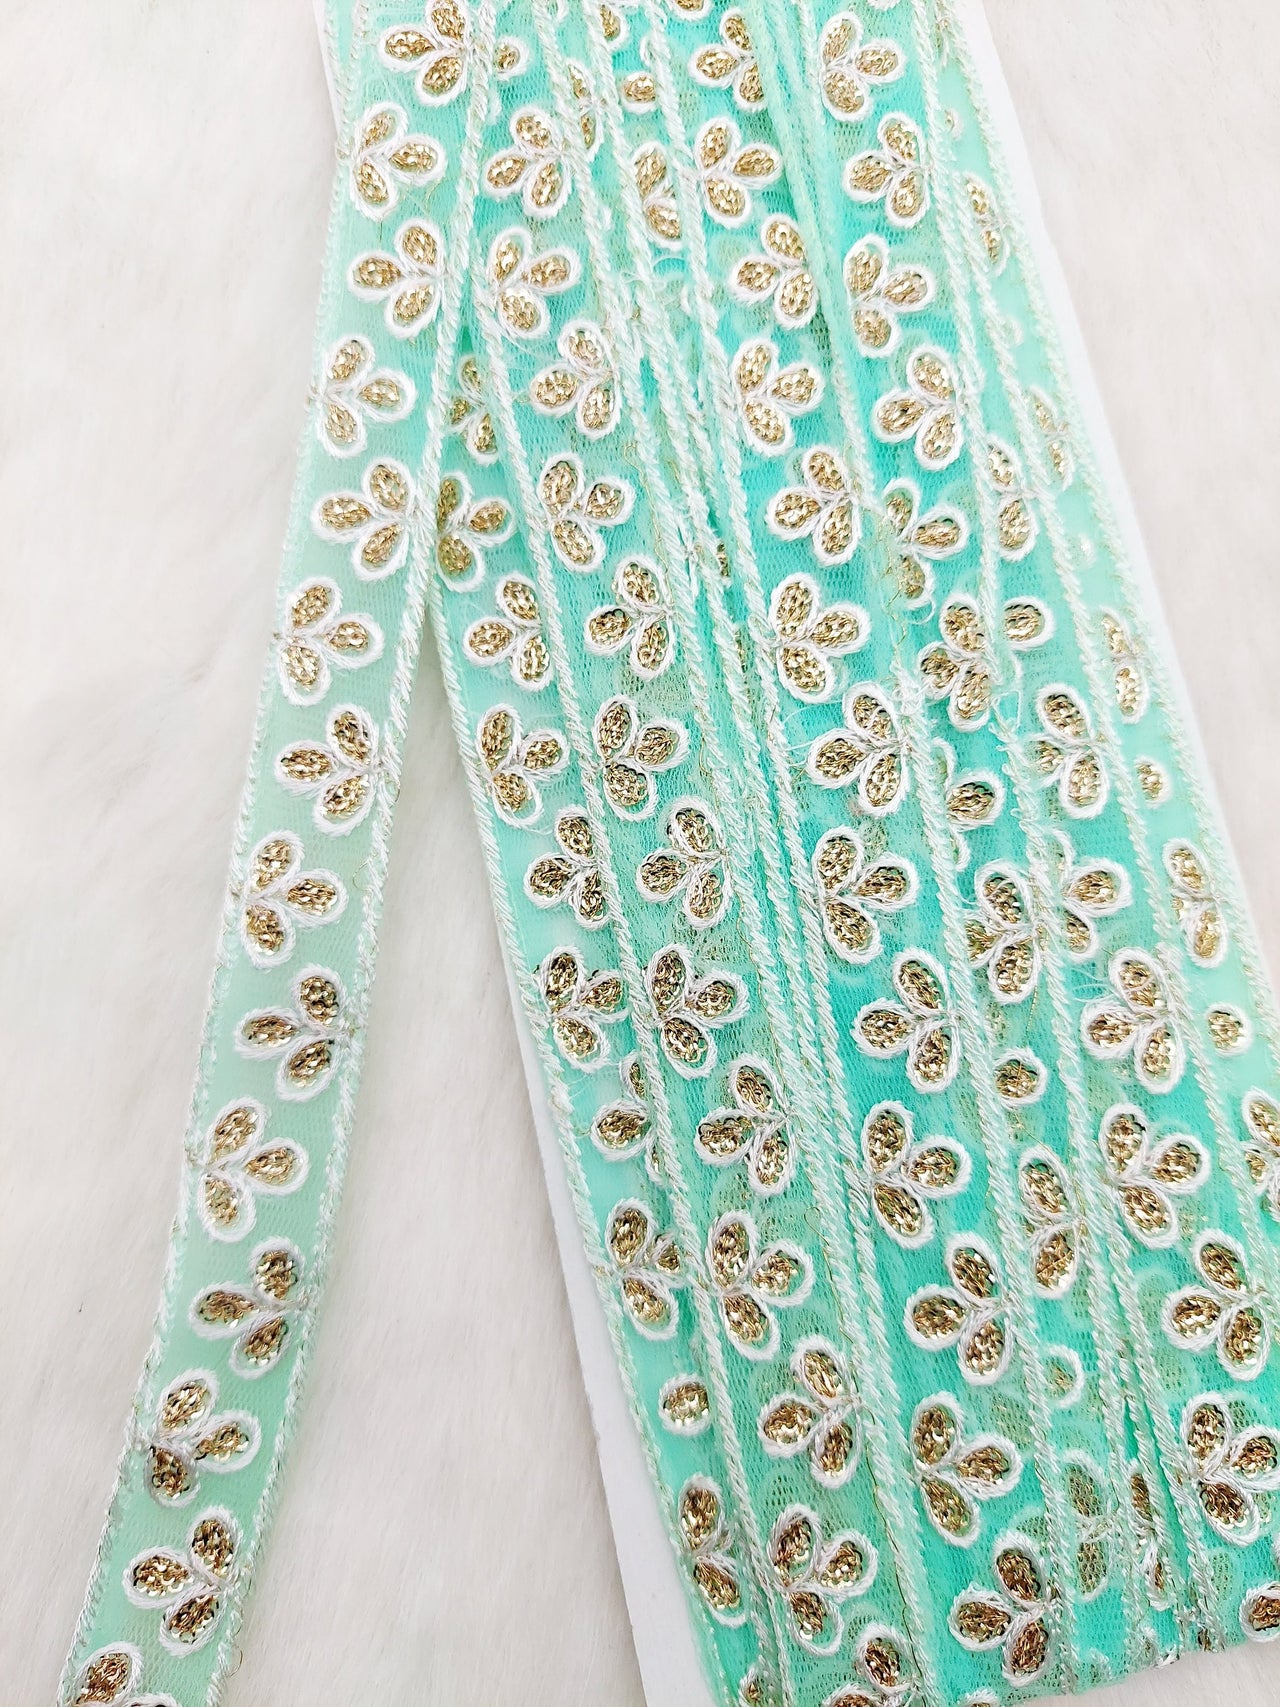 Wholesale Mint Green Net Lace Floral Embroidery & Glitter Gold Sequins, Indian Wedding Border, Gifting Ribbon Costume Trim Fashion Trimming